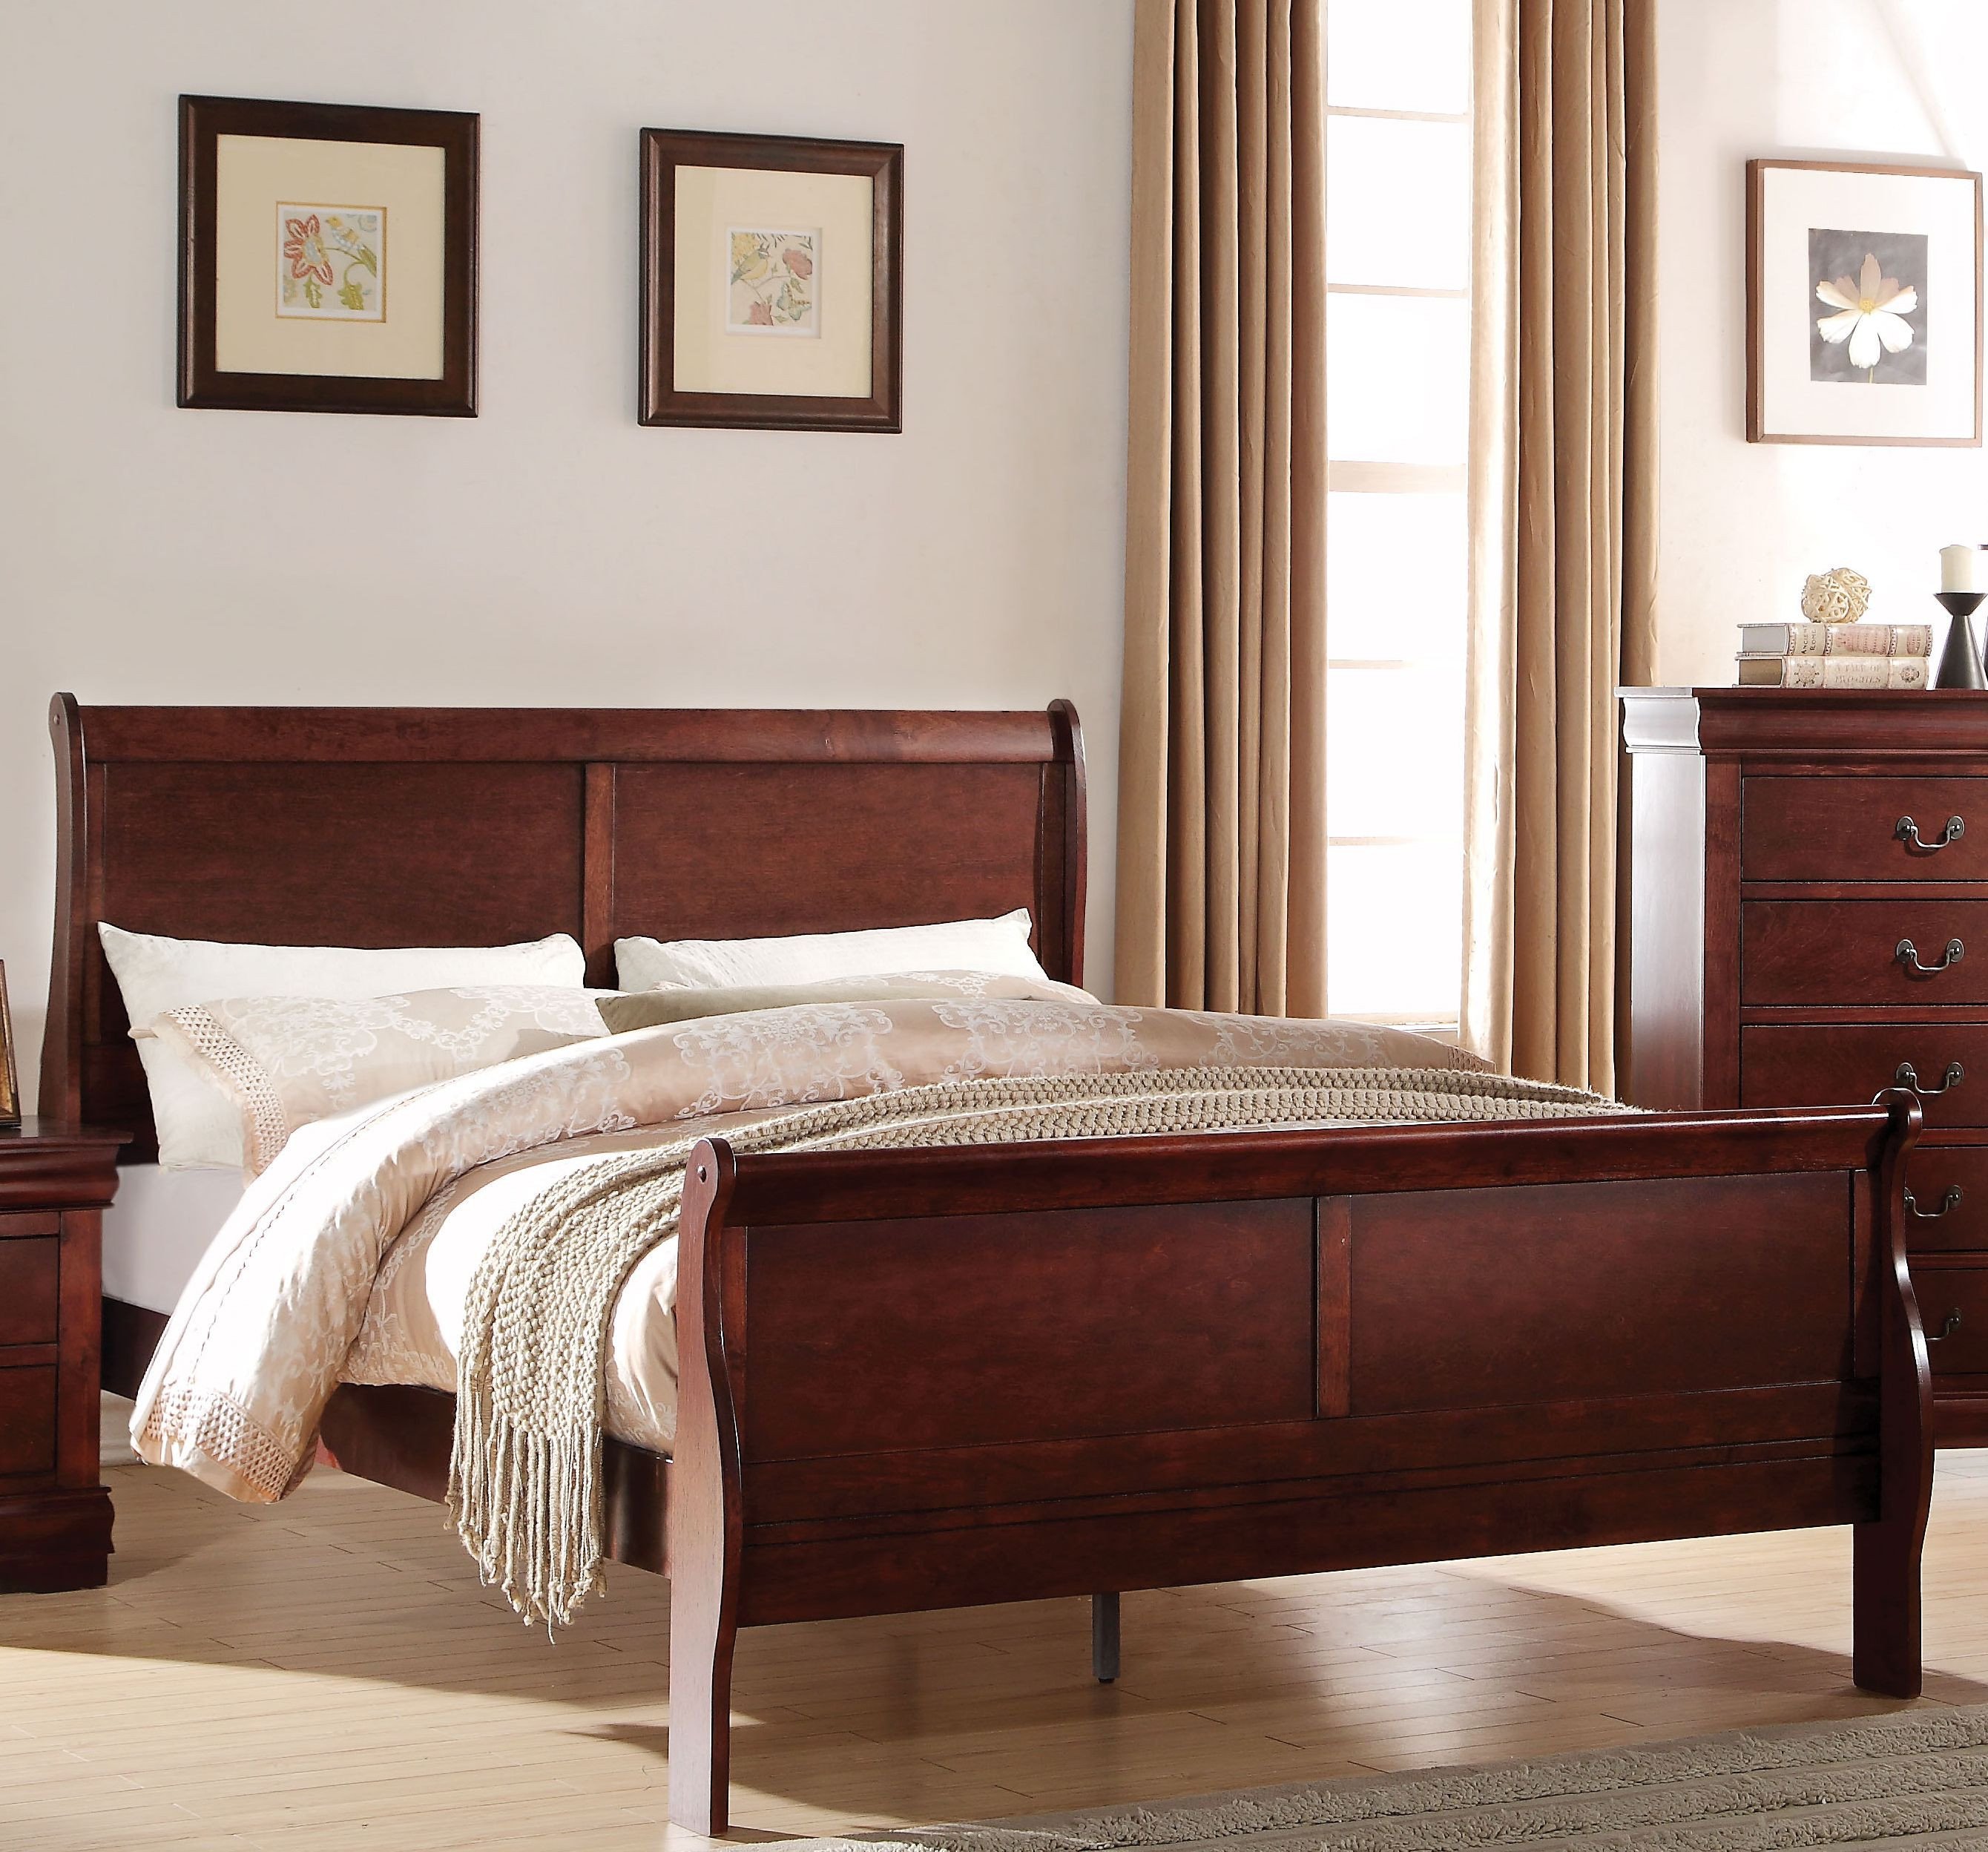 Solid Cherry Wood Bedroom Furniture Beautiful Acme Louis Philippe Queen Panel Bed In Cherry Q